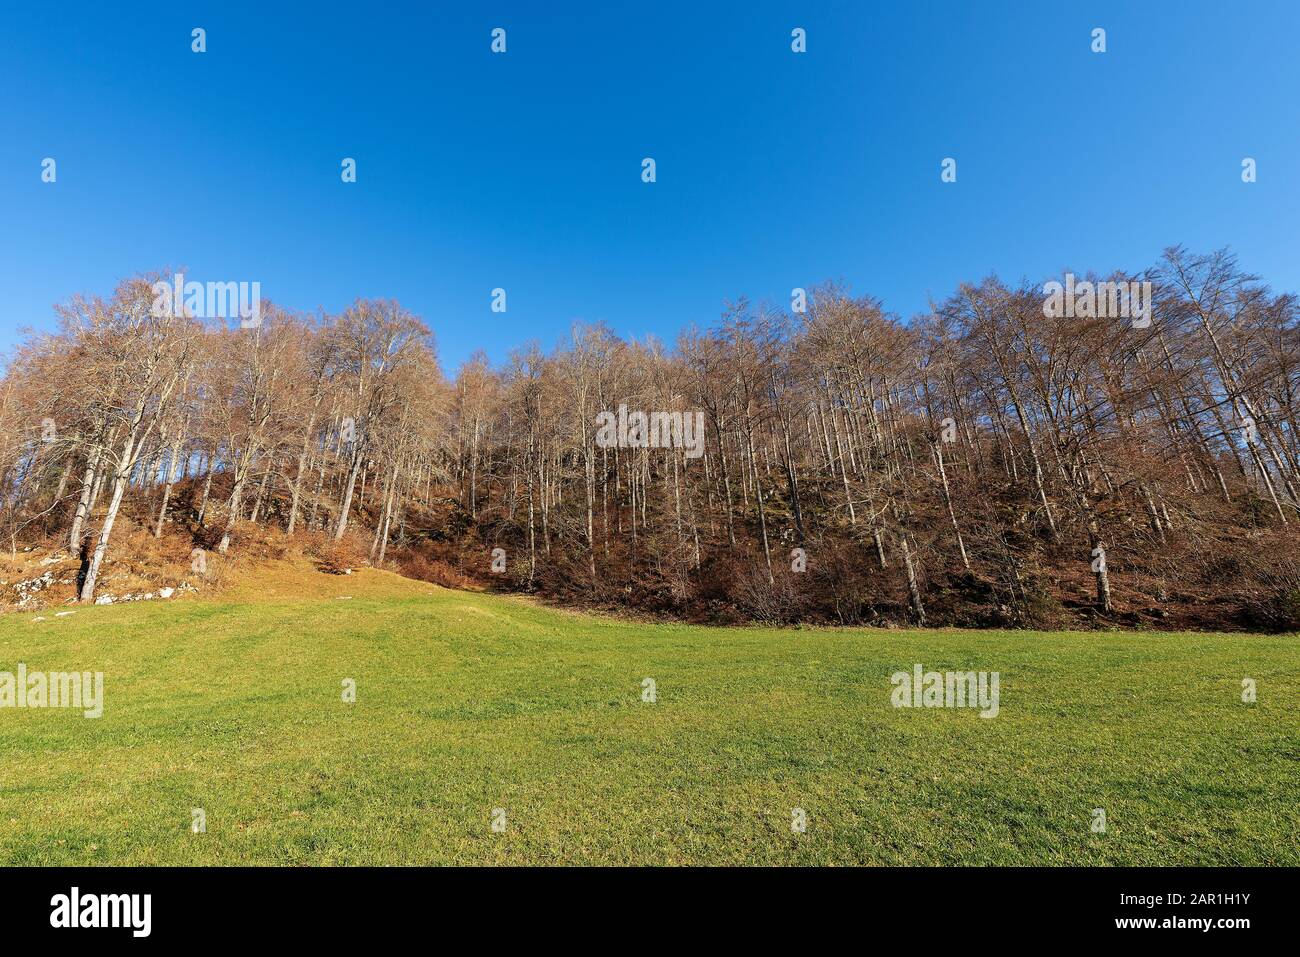 Deciduous forest with green grass on a clear blue sky in autumn